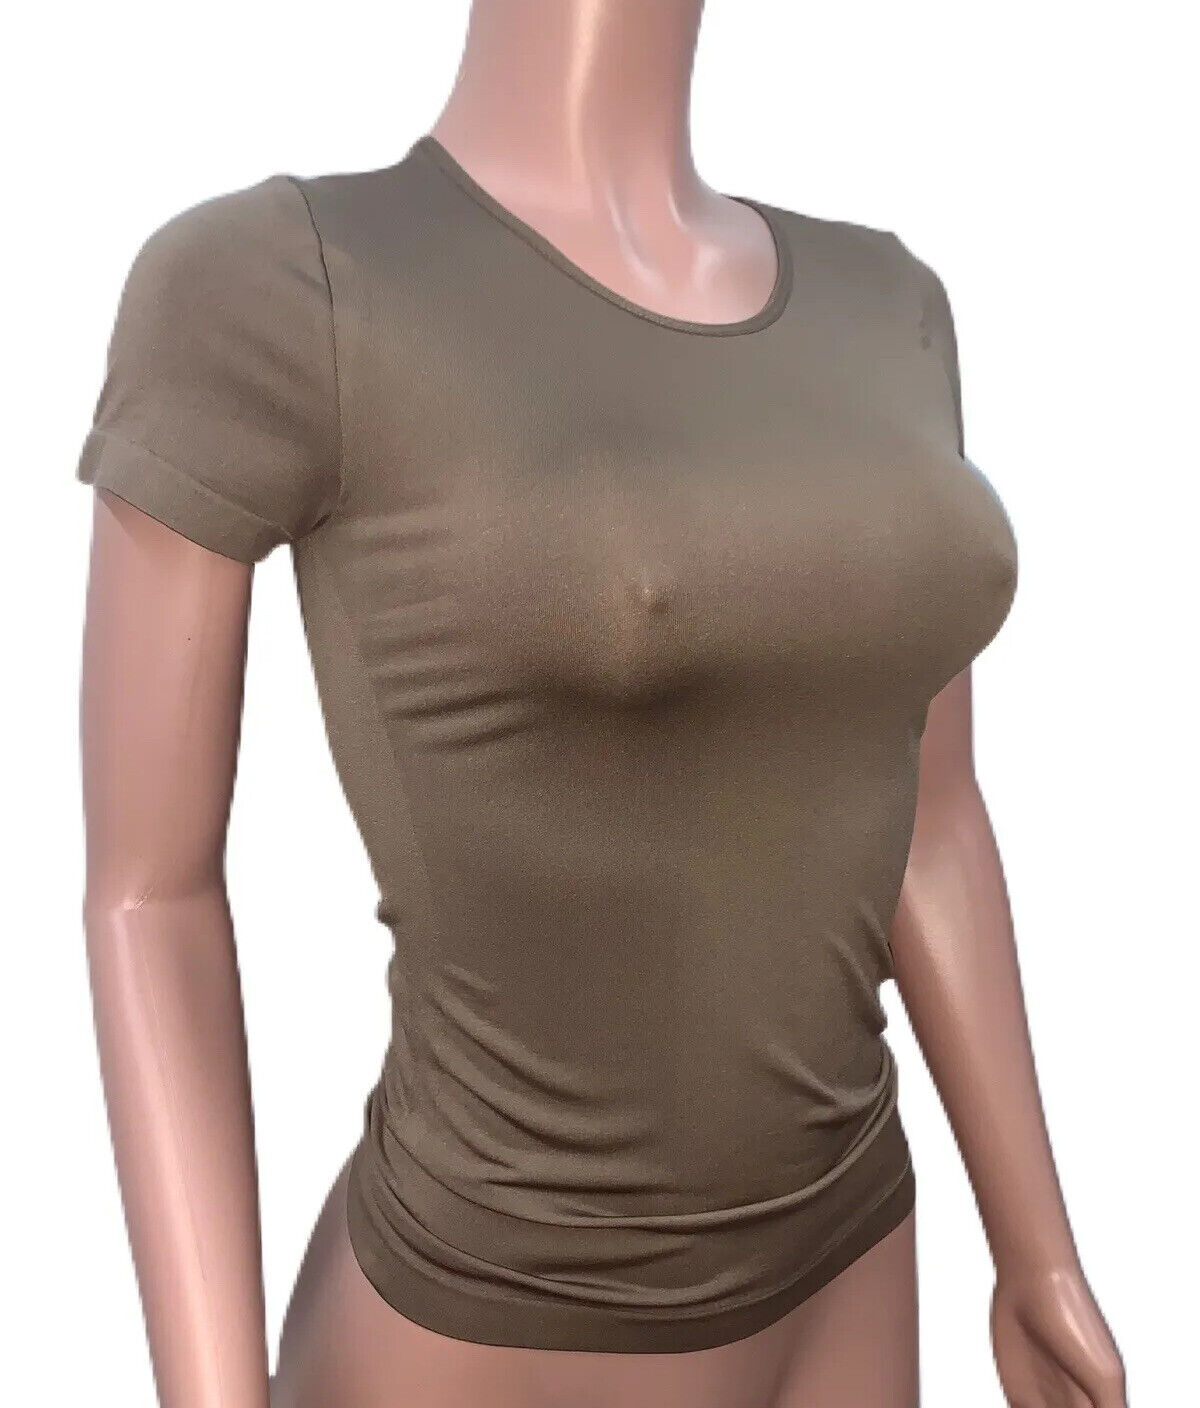 amber gass recommends Skin Tight T Shirt Womens